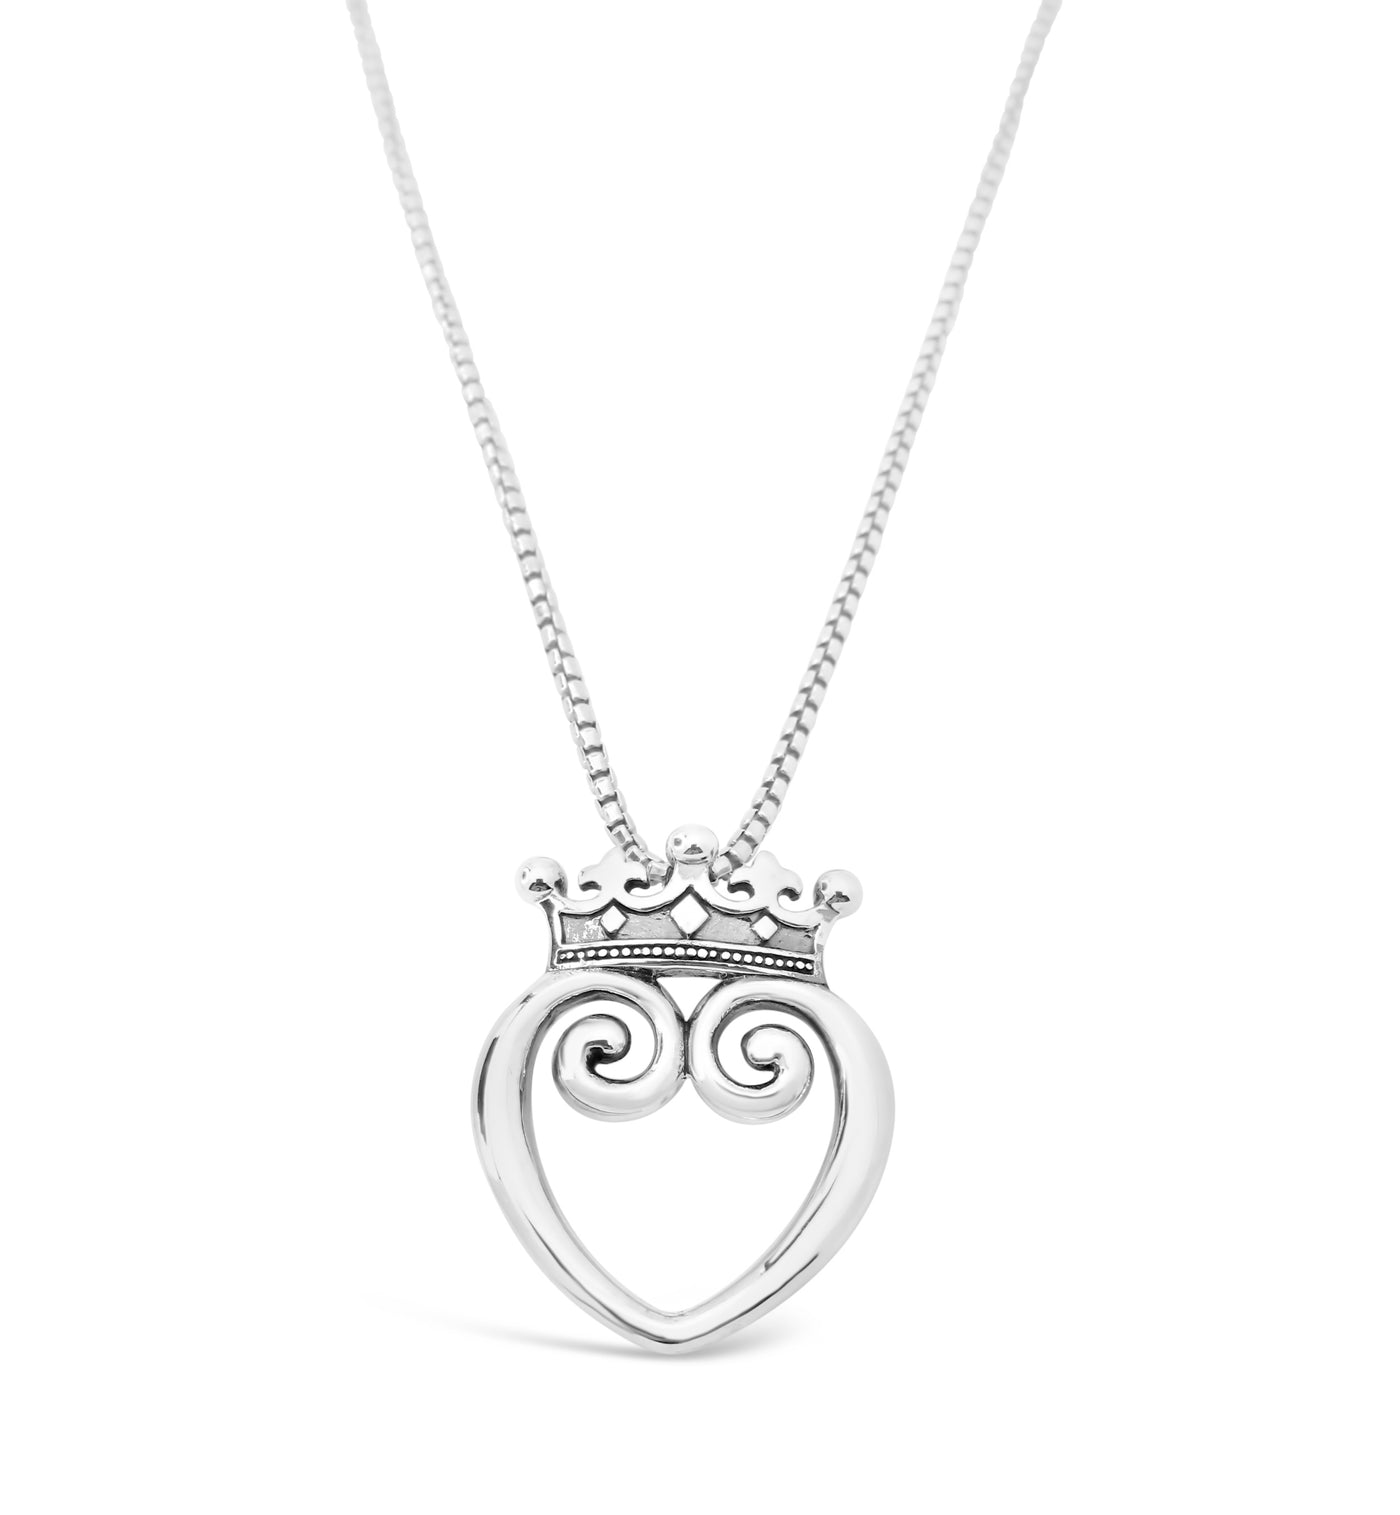 Queen of Hearts Pendant - Large